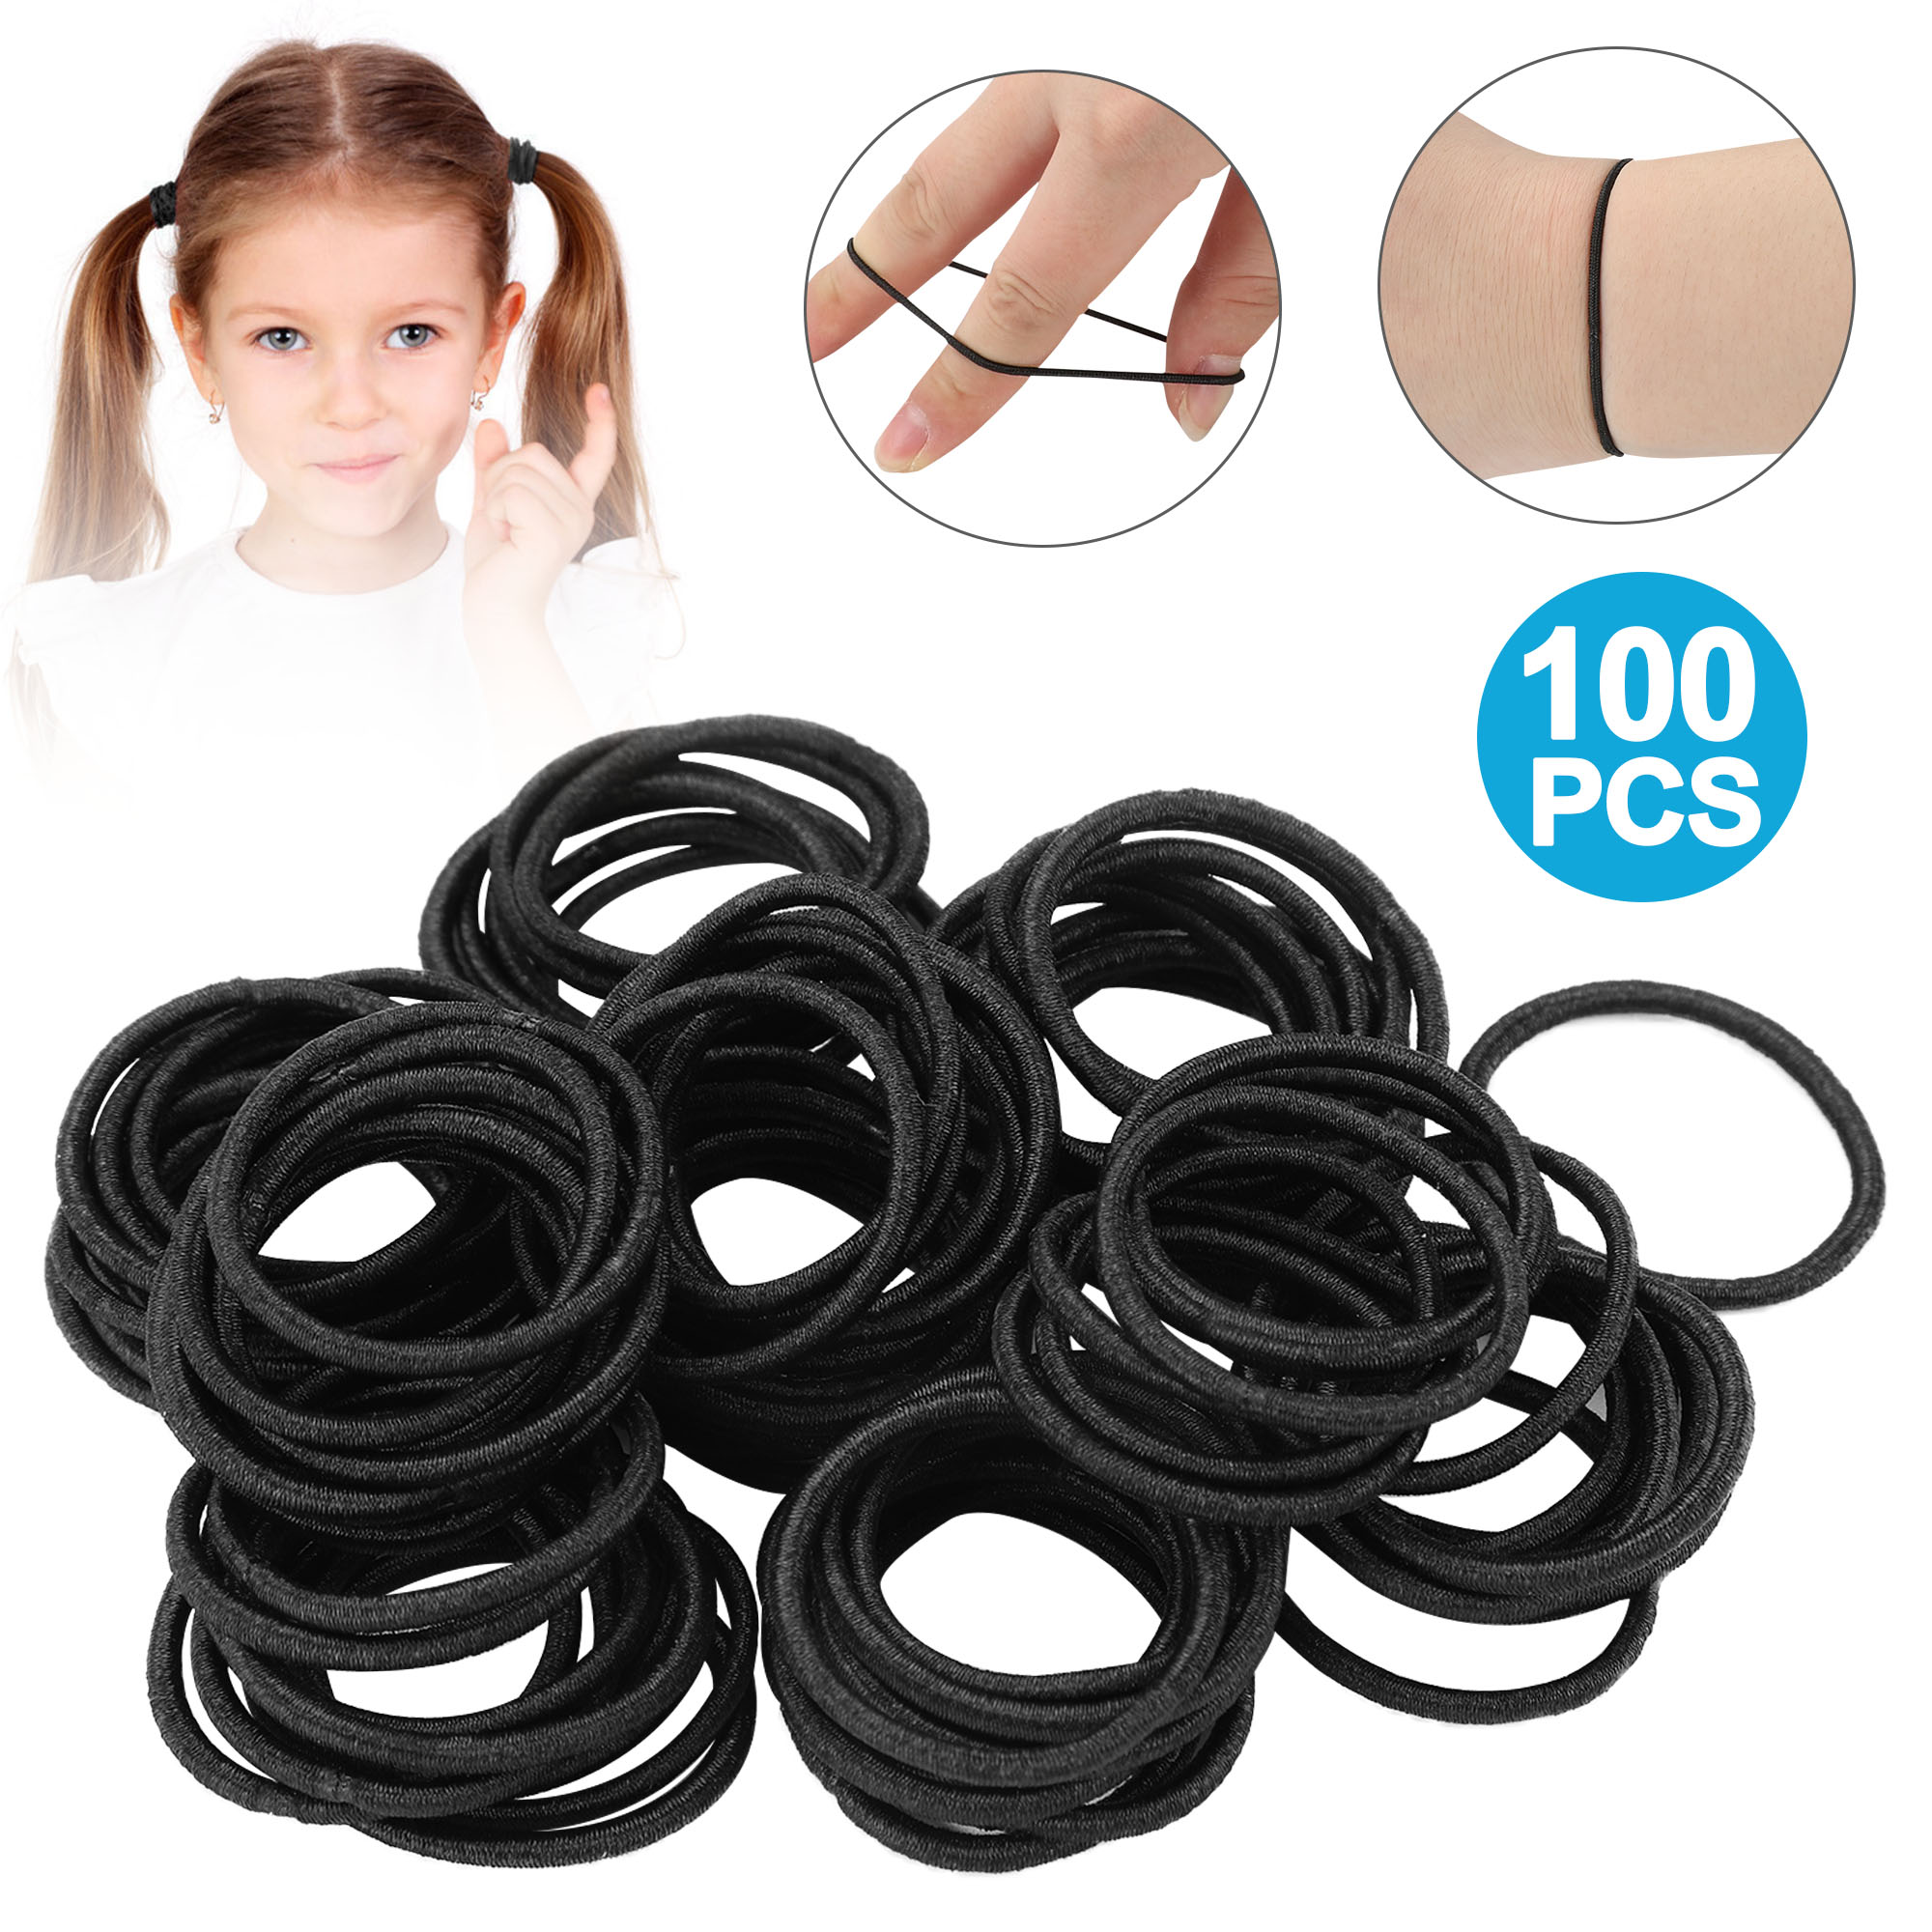 TSV 100pcs Black Elastic Hair Ropes, No Crease Rubber Band Hair Ties, Ouchless Ponytail Holders for Girls - image 1 of 7